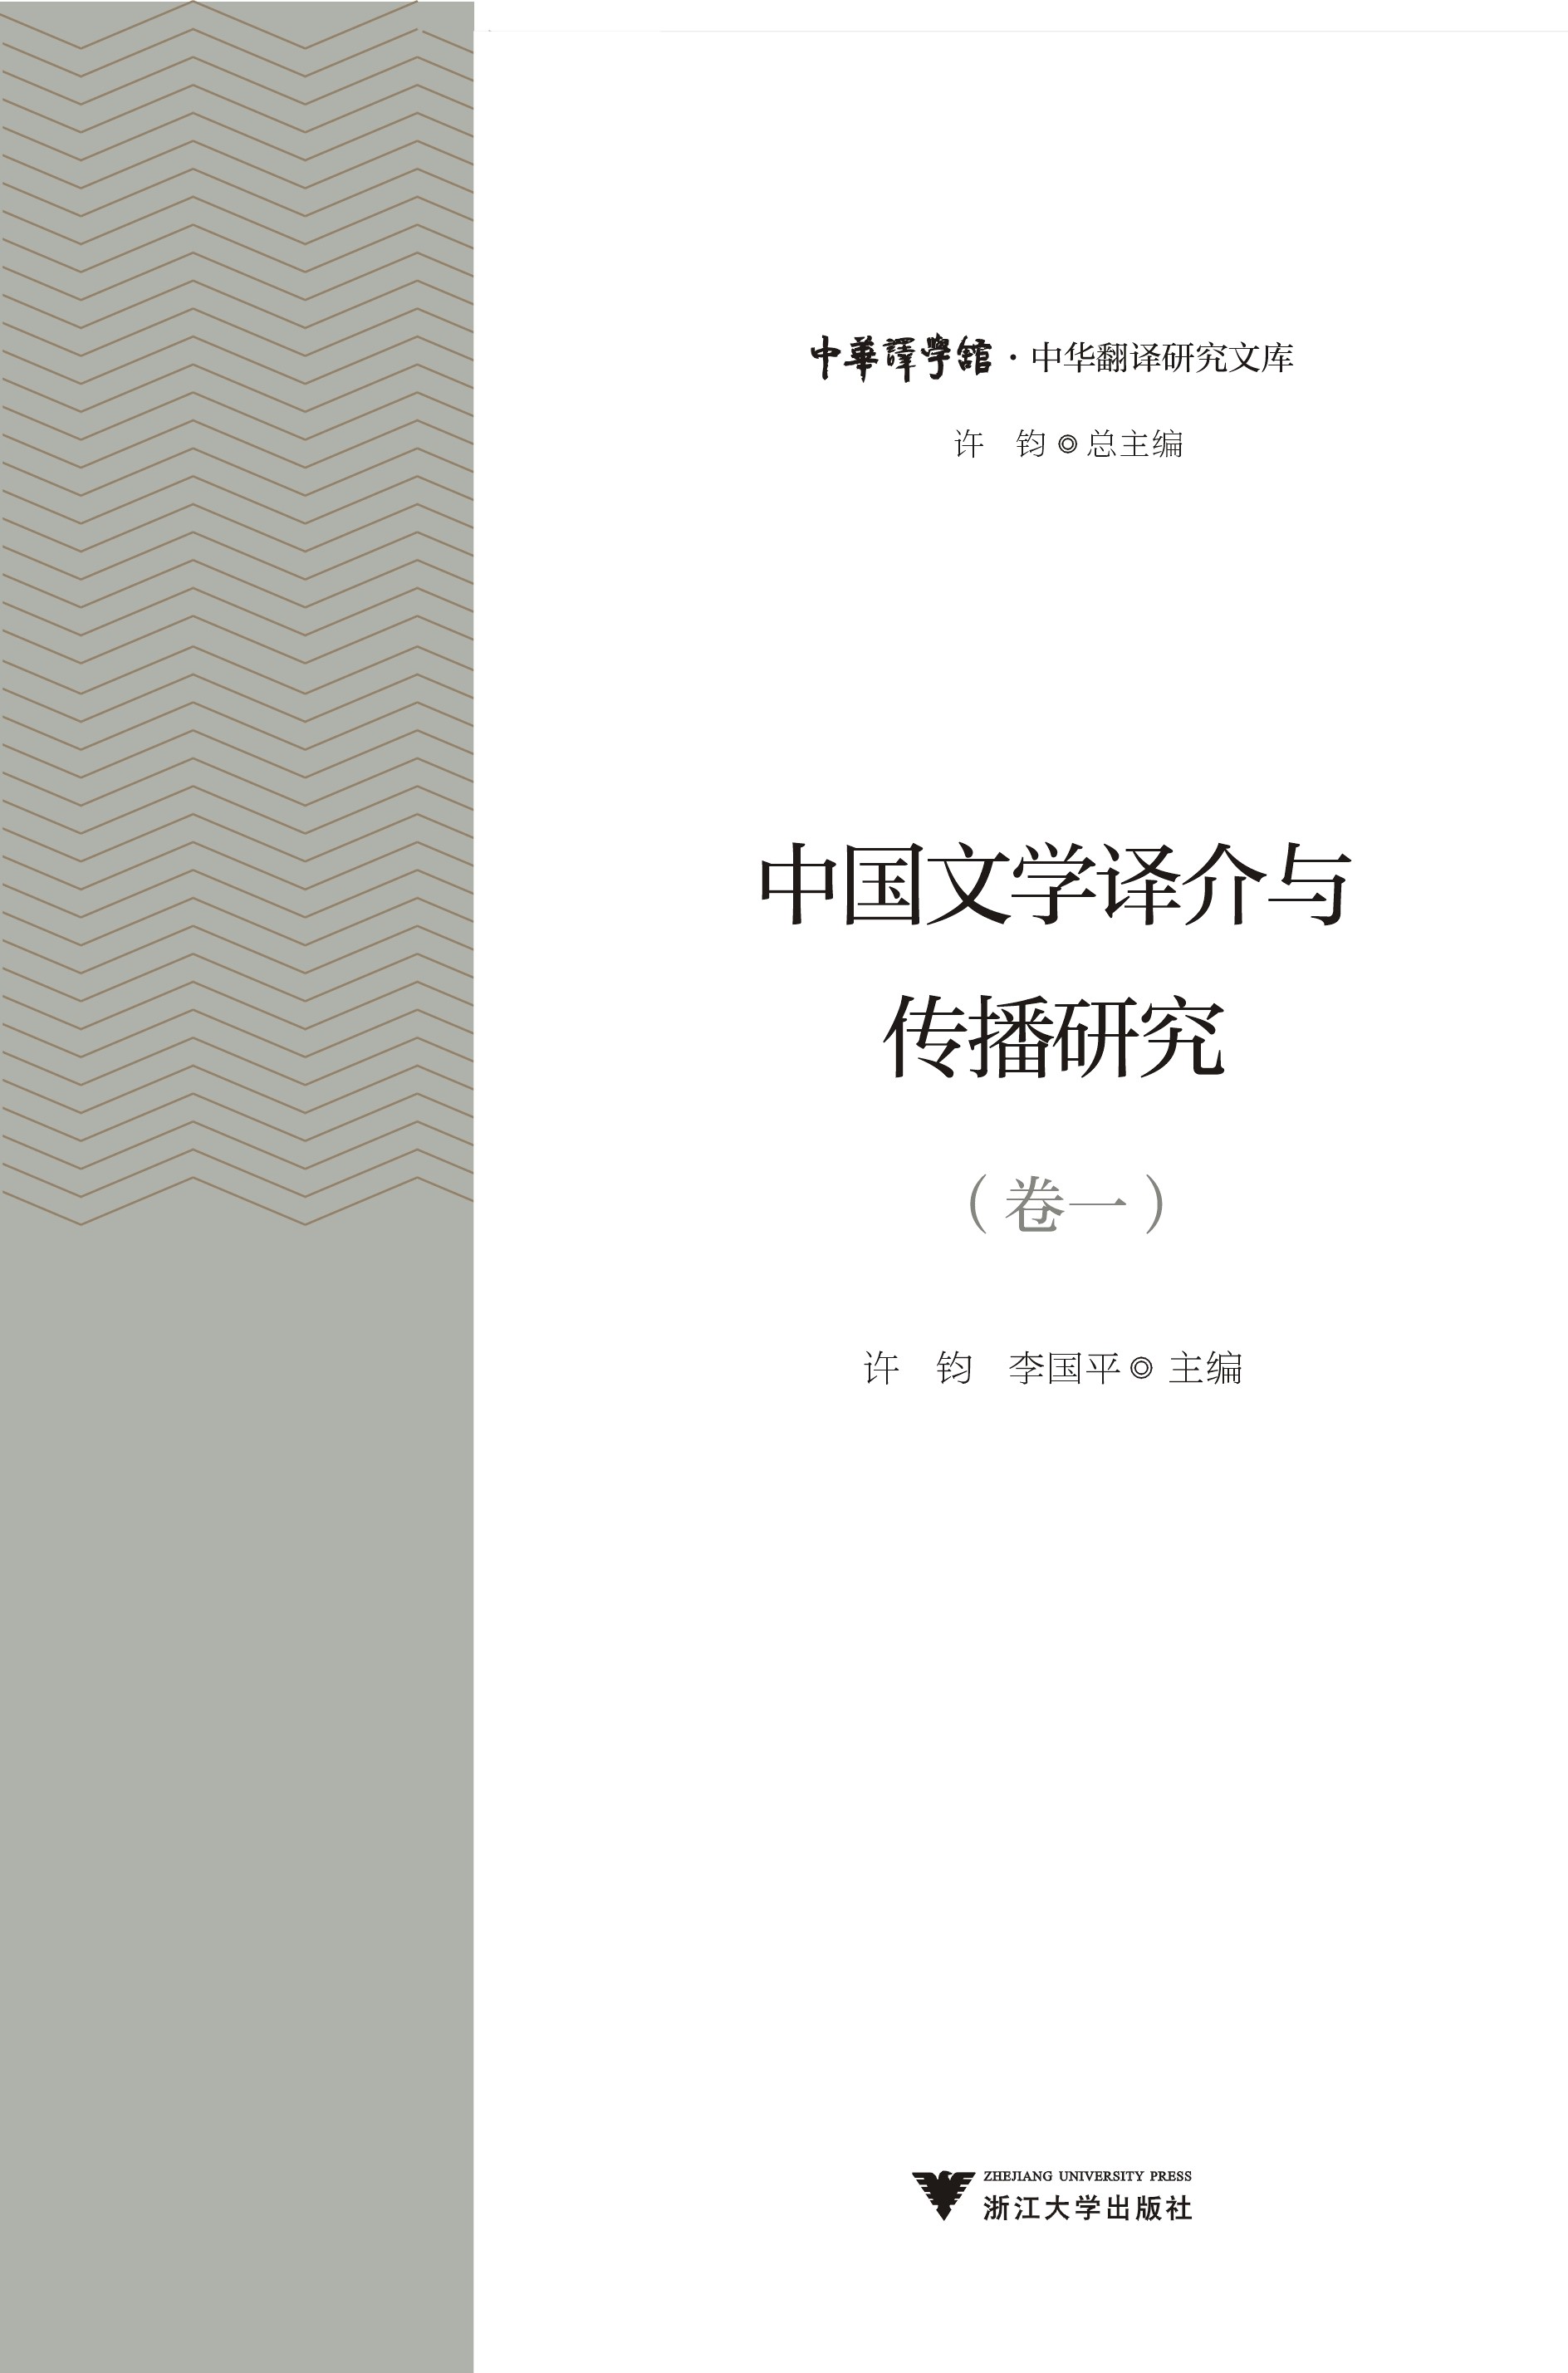 Translation and Promotion of Chinese Literature (Volume I)